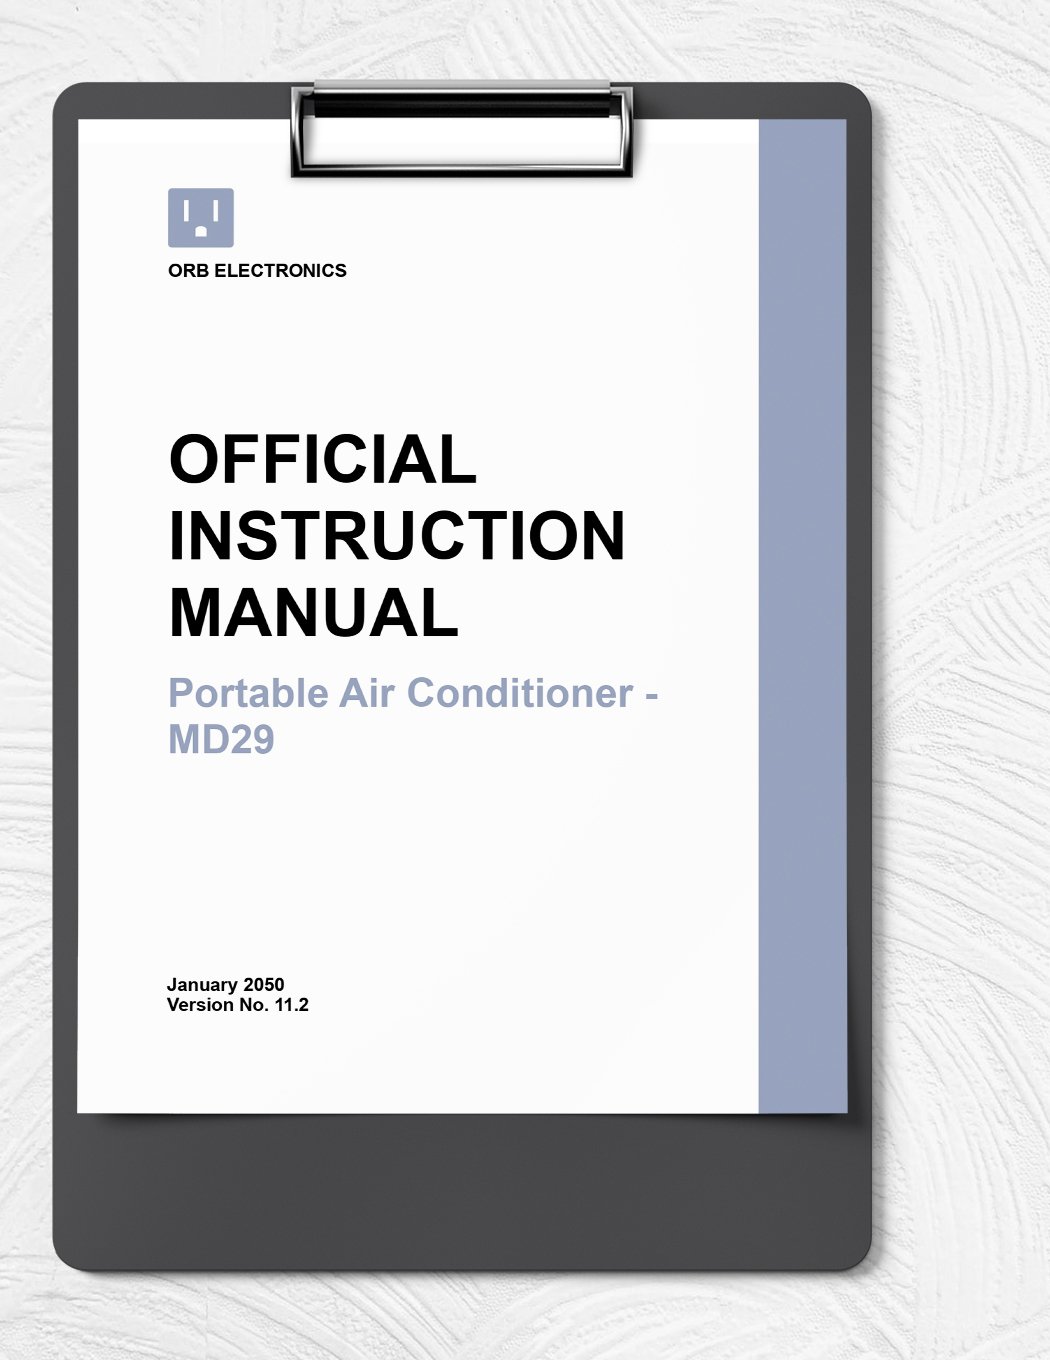 Official Instruction Manual Template